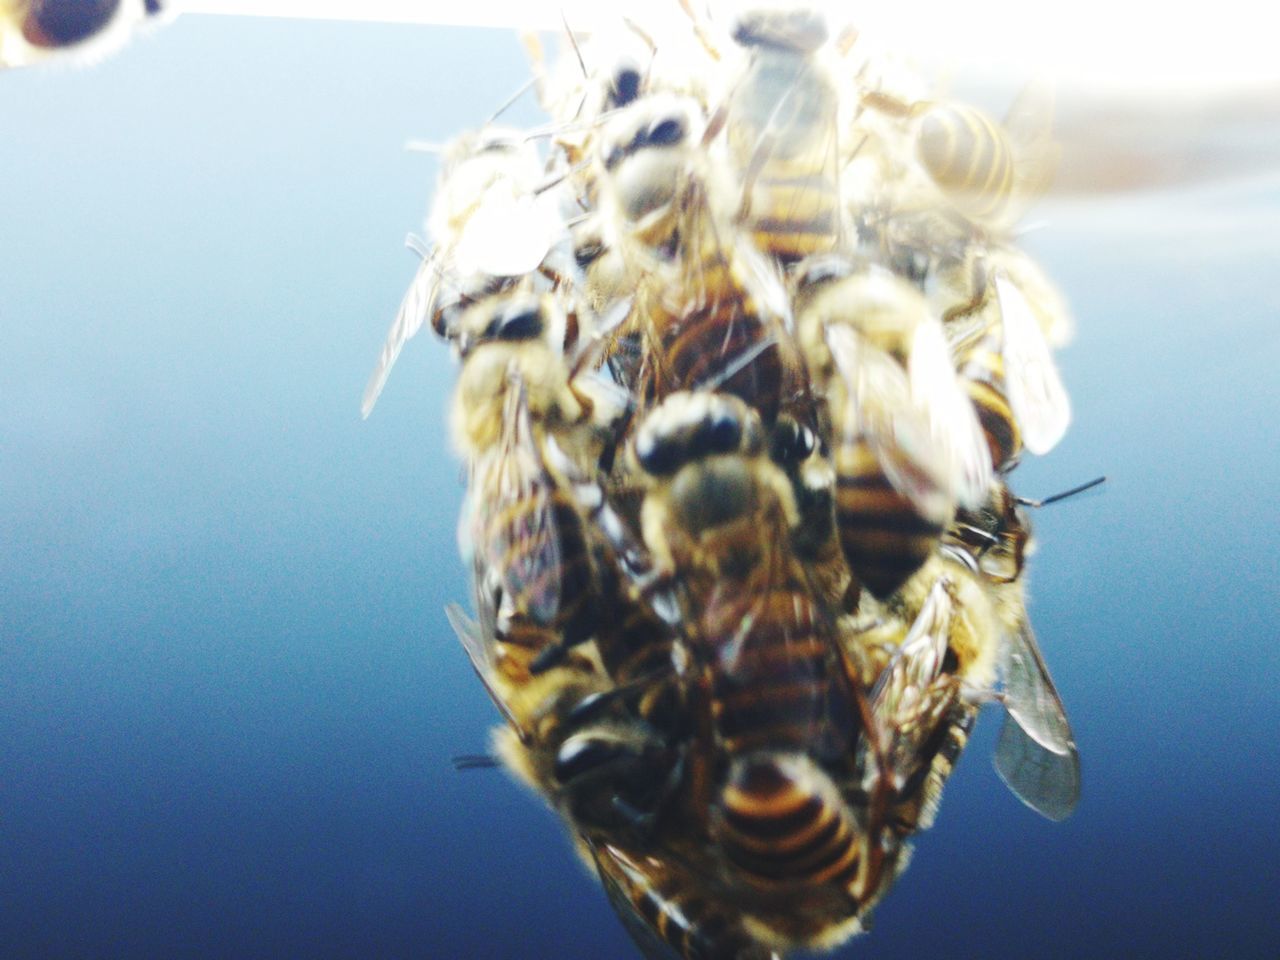 CLOSE-UP OF BEE